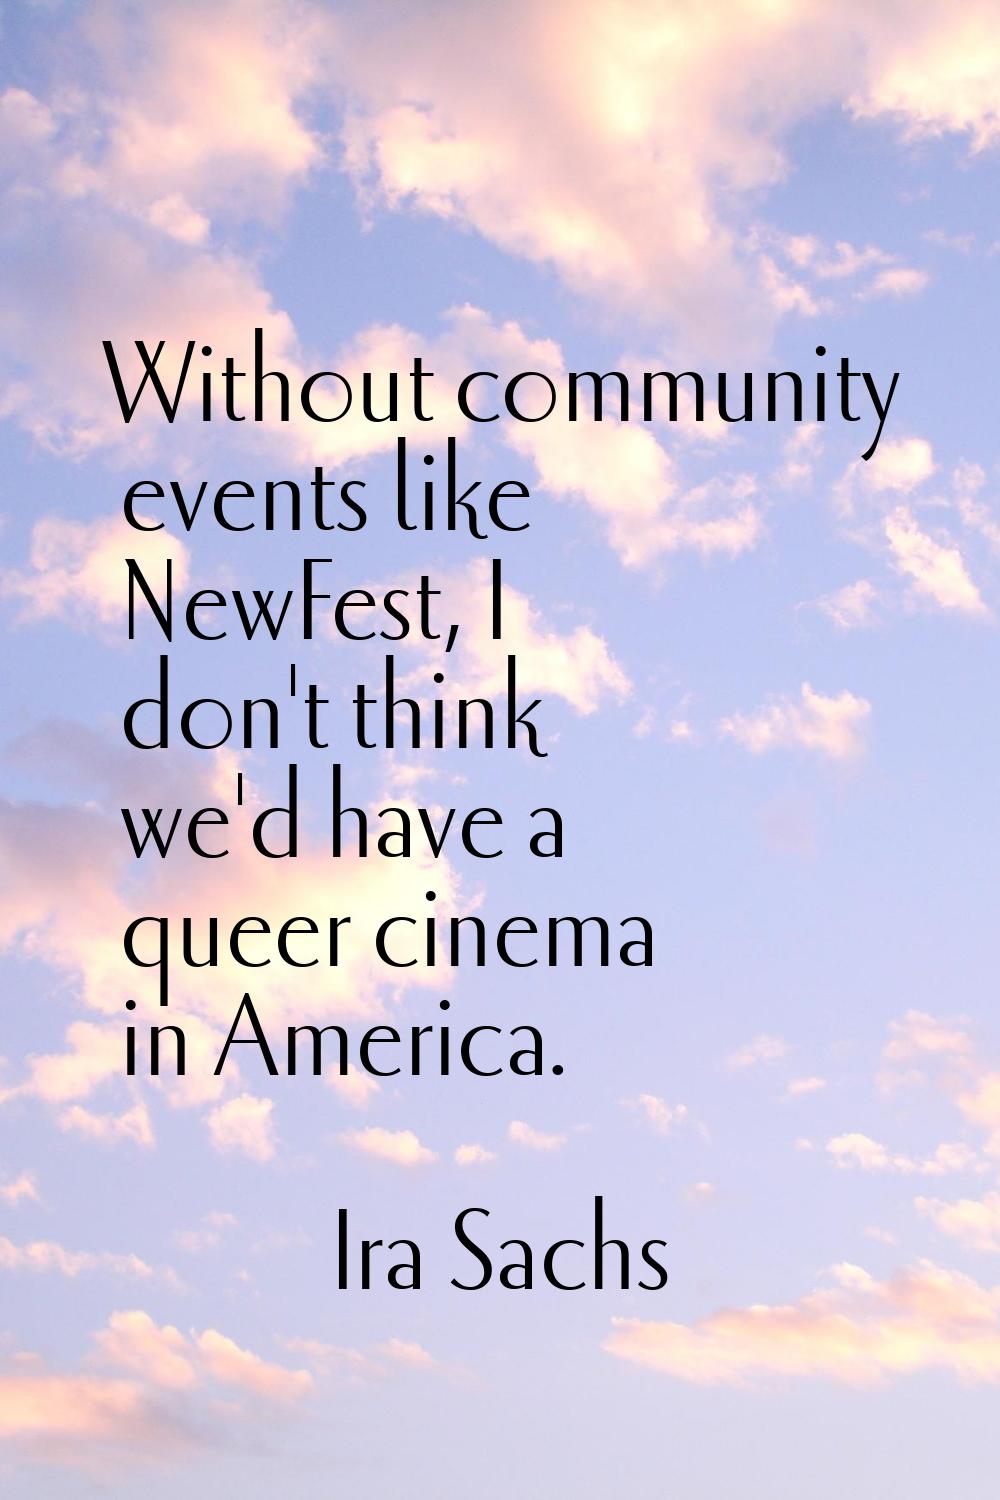 Without community events like NewFest, I don't think we'd have a queer cinema in America.